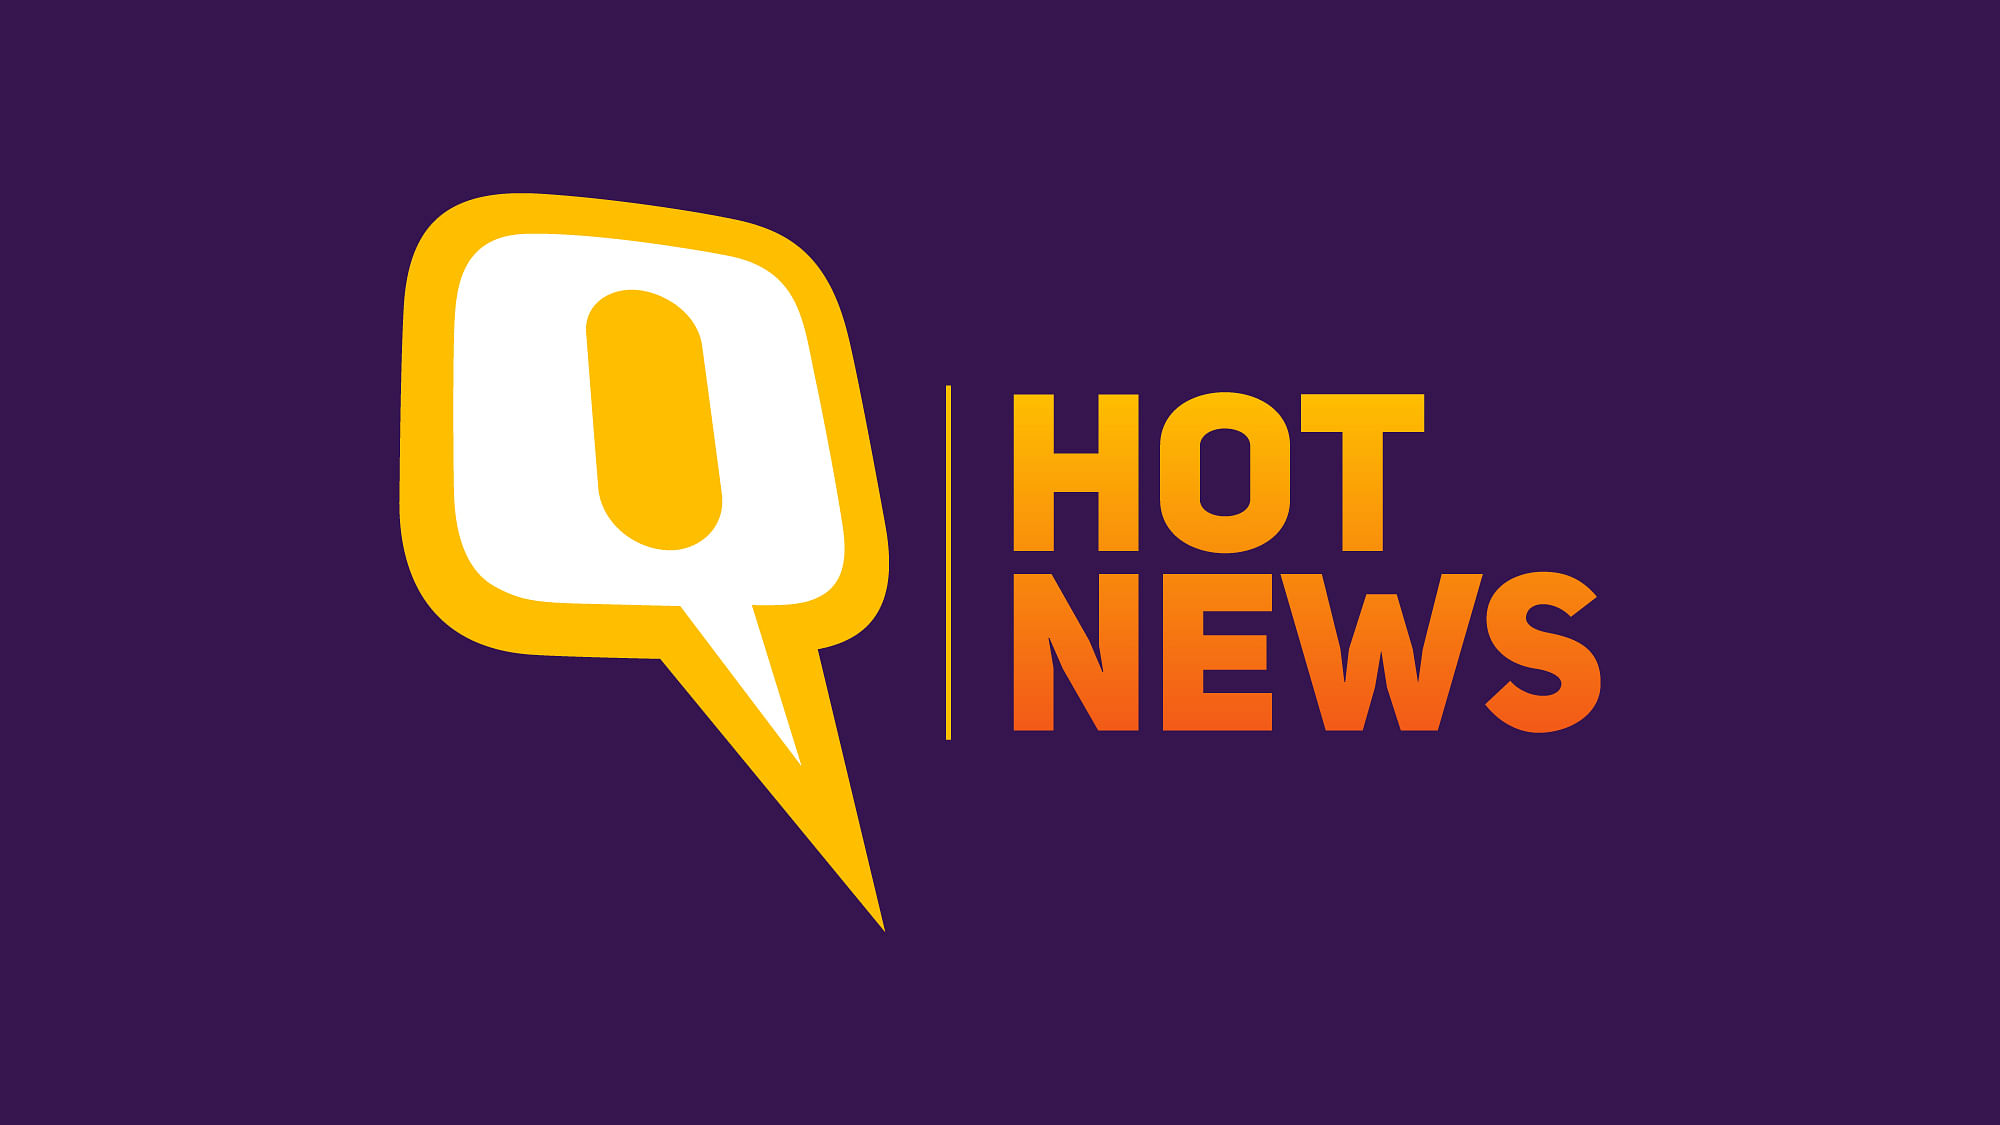 Get all the breaking news on The Quint.&nbsp;